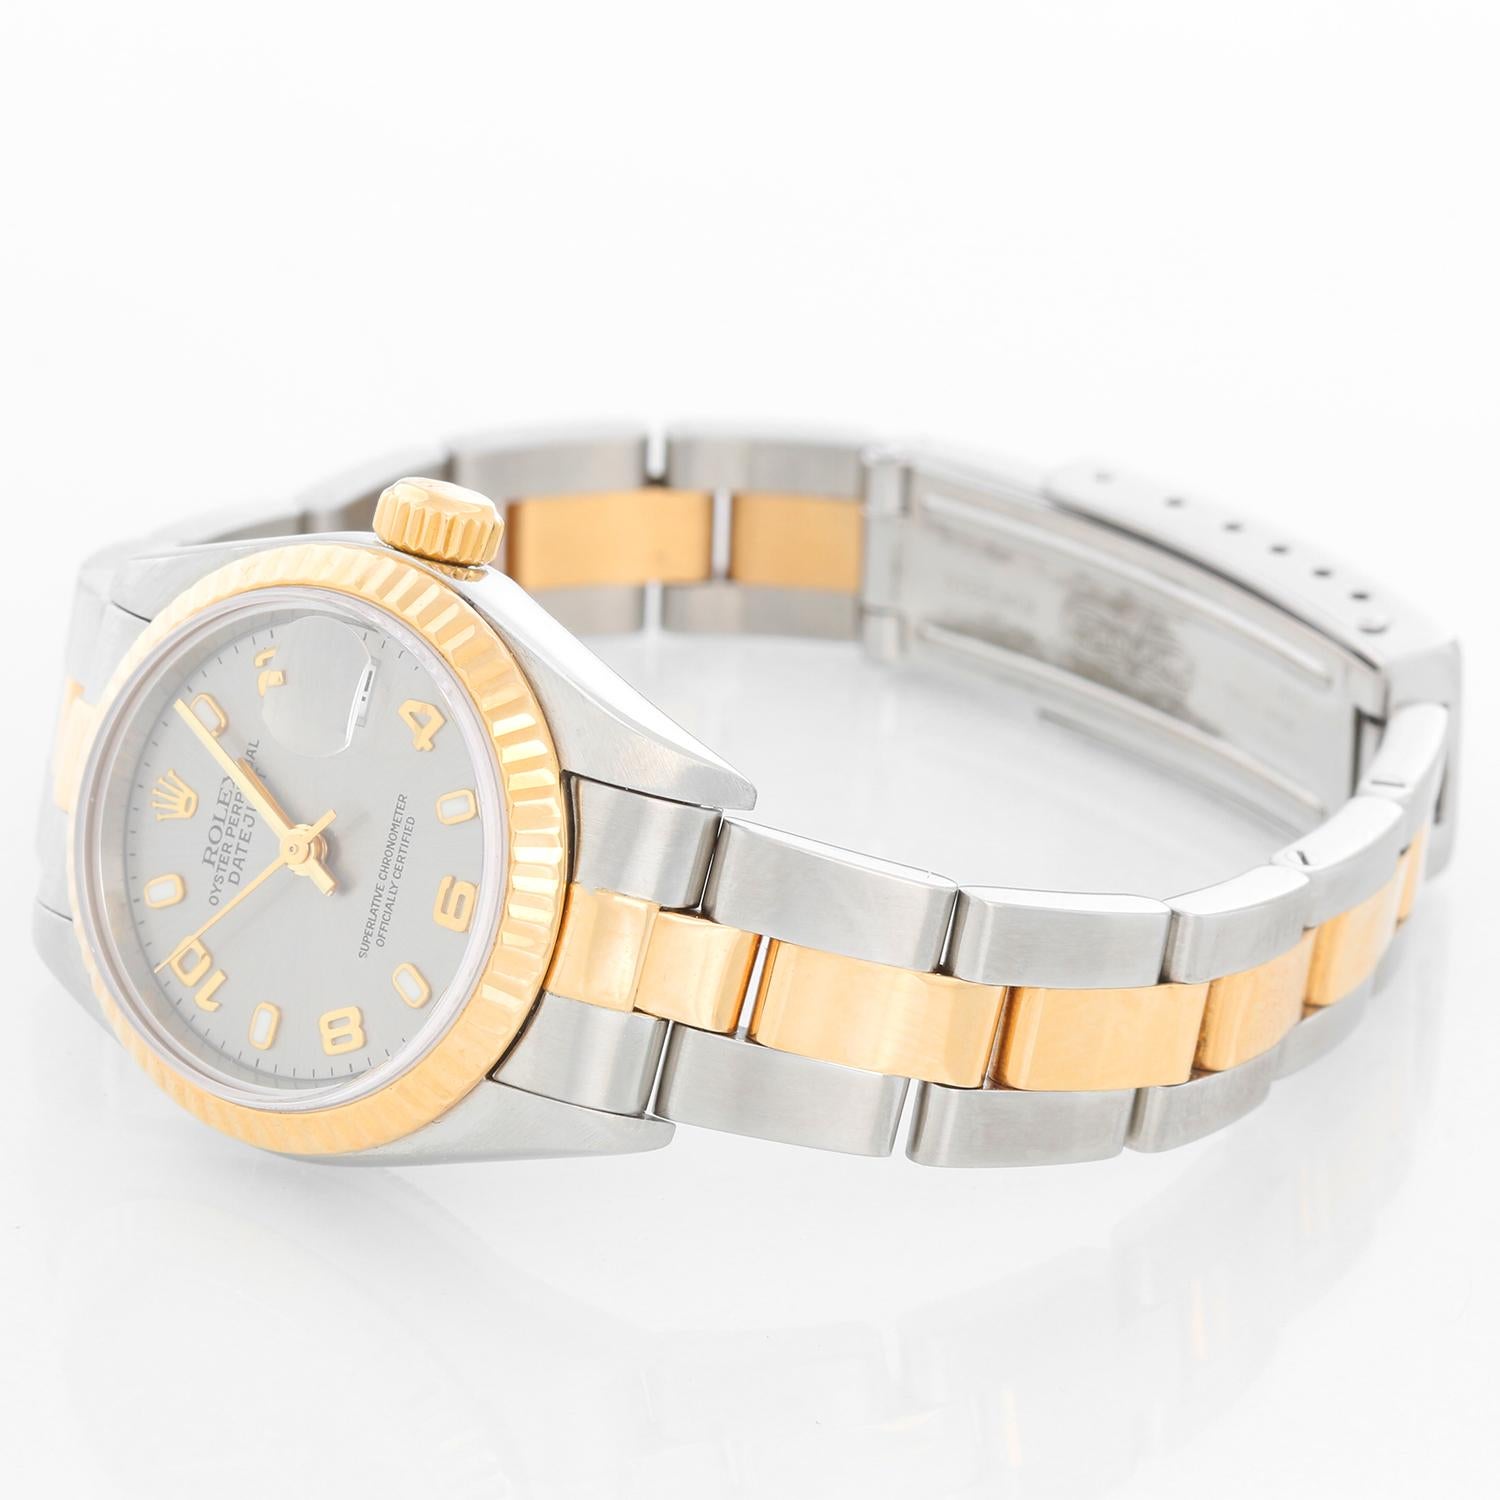 Rolex Datejust 2-Tone Ladies Steel & Gold Watch 79173 - Automatic winding, Quickset, 31 jewels, sapphire crystal. Stainless steel case with 18k yellow gold fluted bezel (26mm diameter). Gray dial with Arabic numerals and luminous markers. Stainless